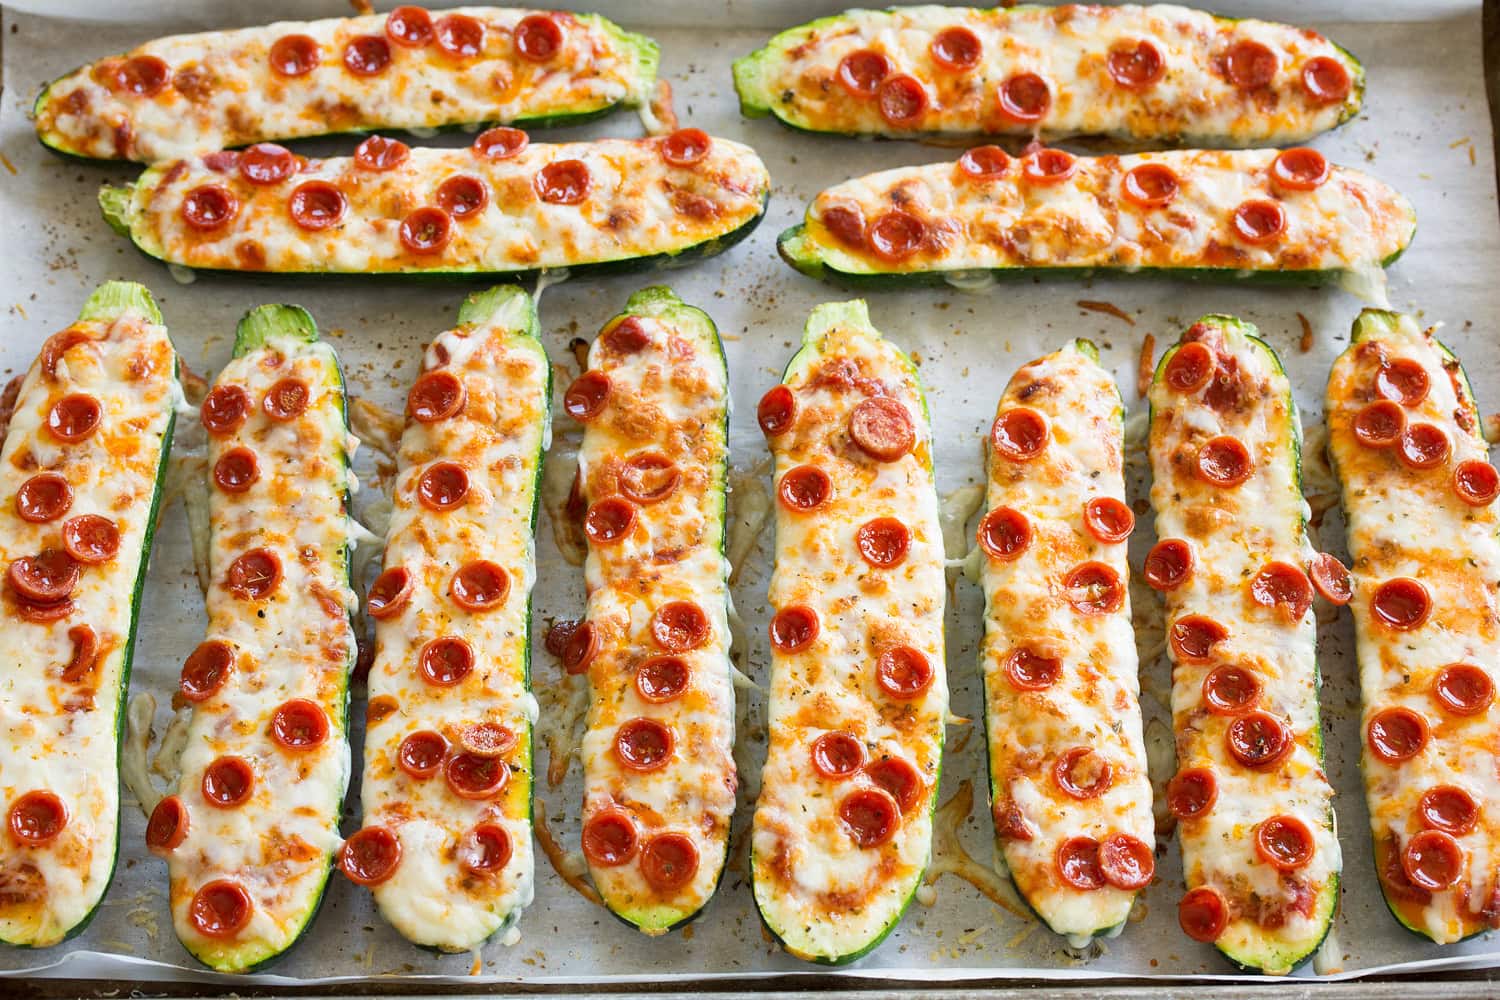 Completed zucchini pizza boats shown after baking through and completed.